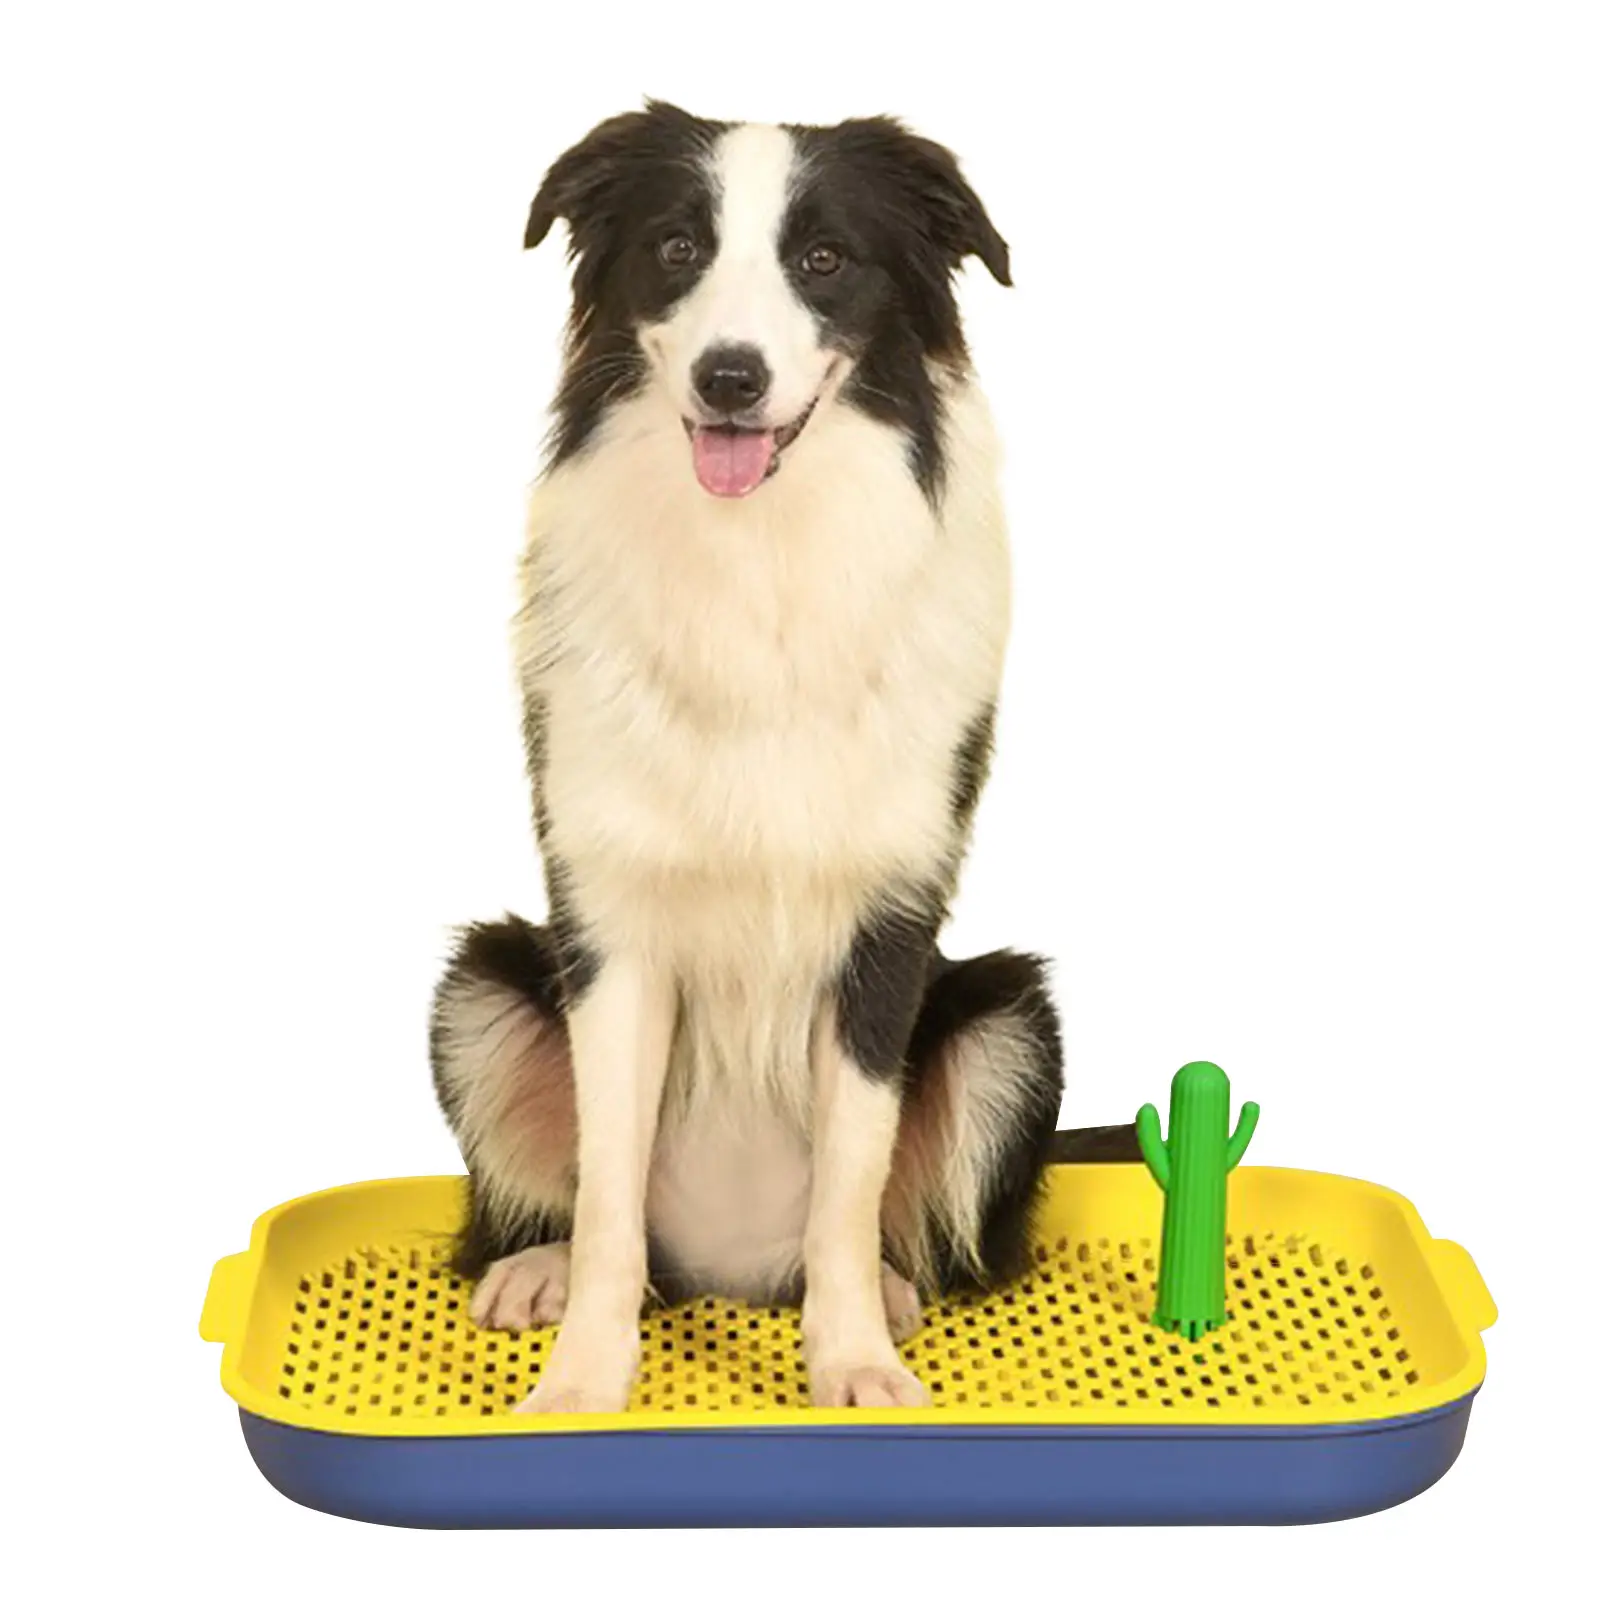 

Indoor Dog Potty Tray Indoor Dogs Potty Training Toilet With Cactus Pad Holder Works With Most Training Pads Easy To Clean And